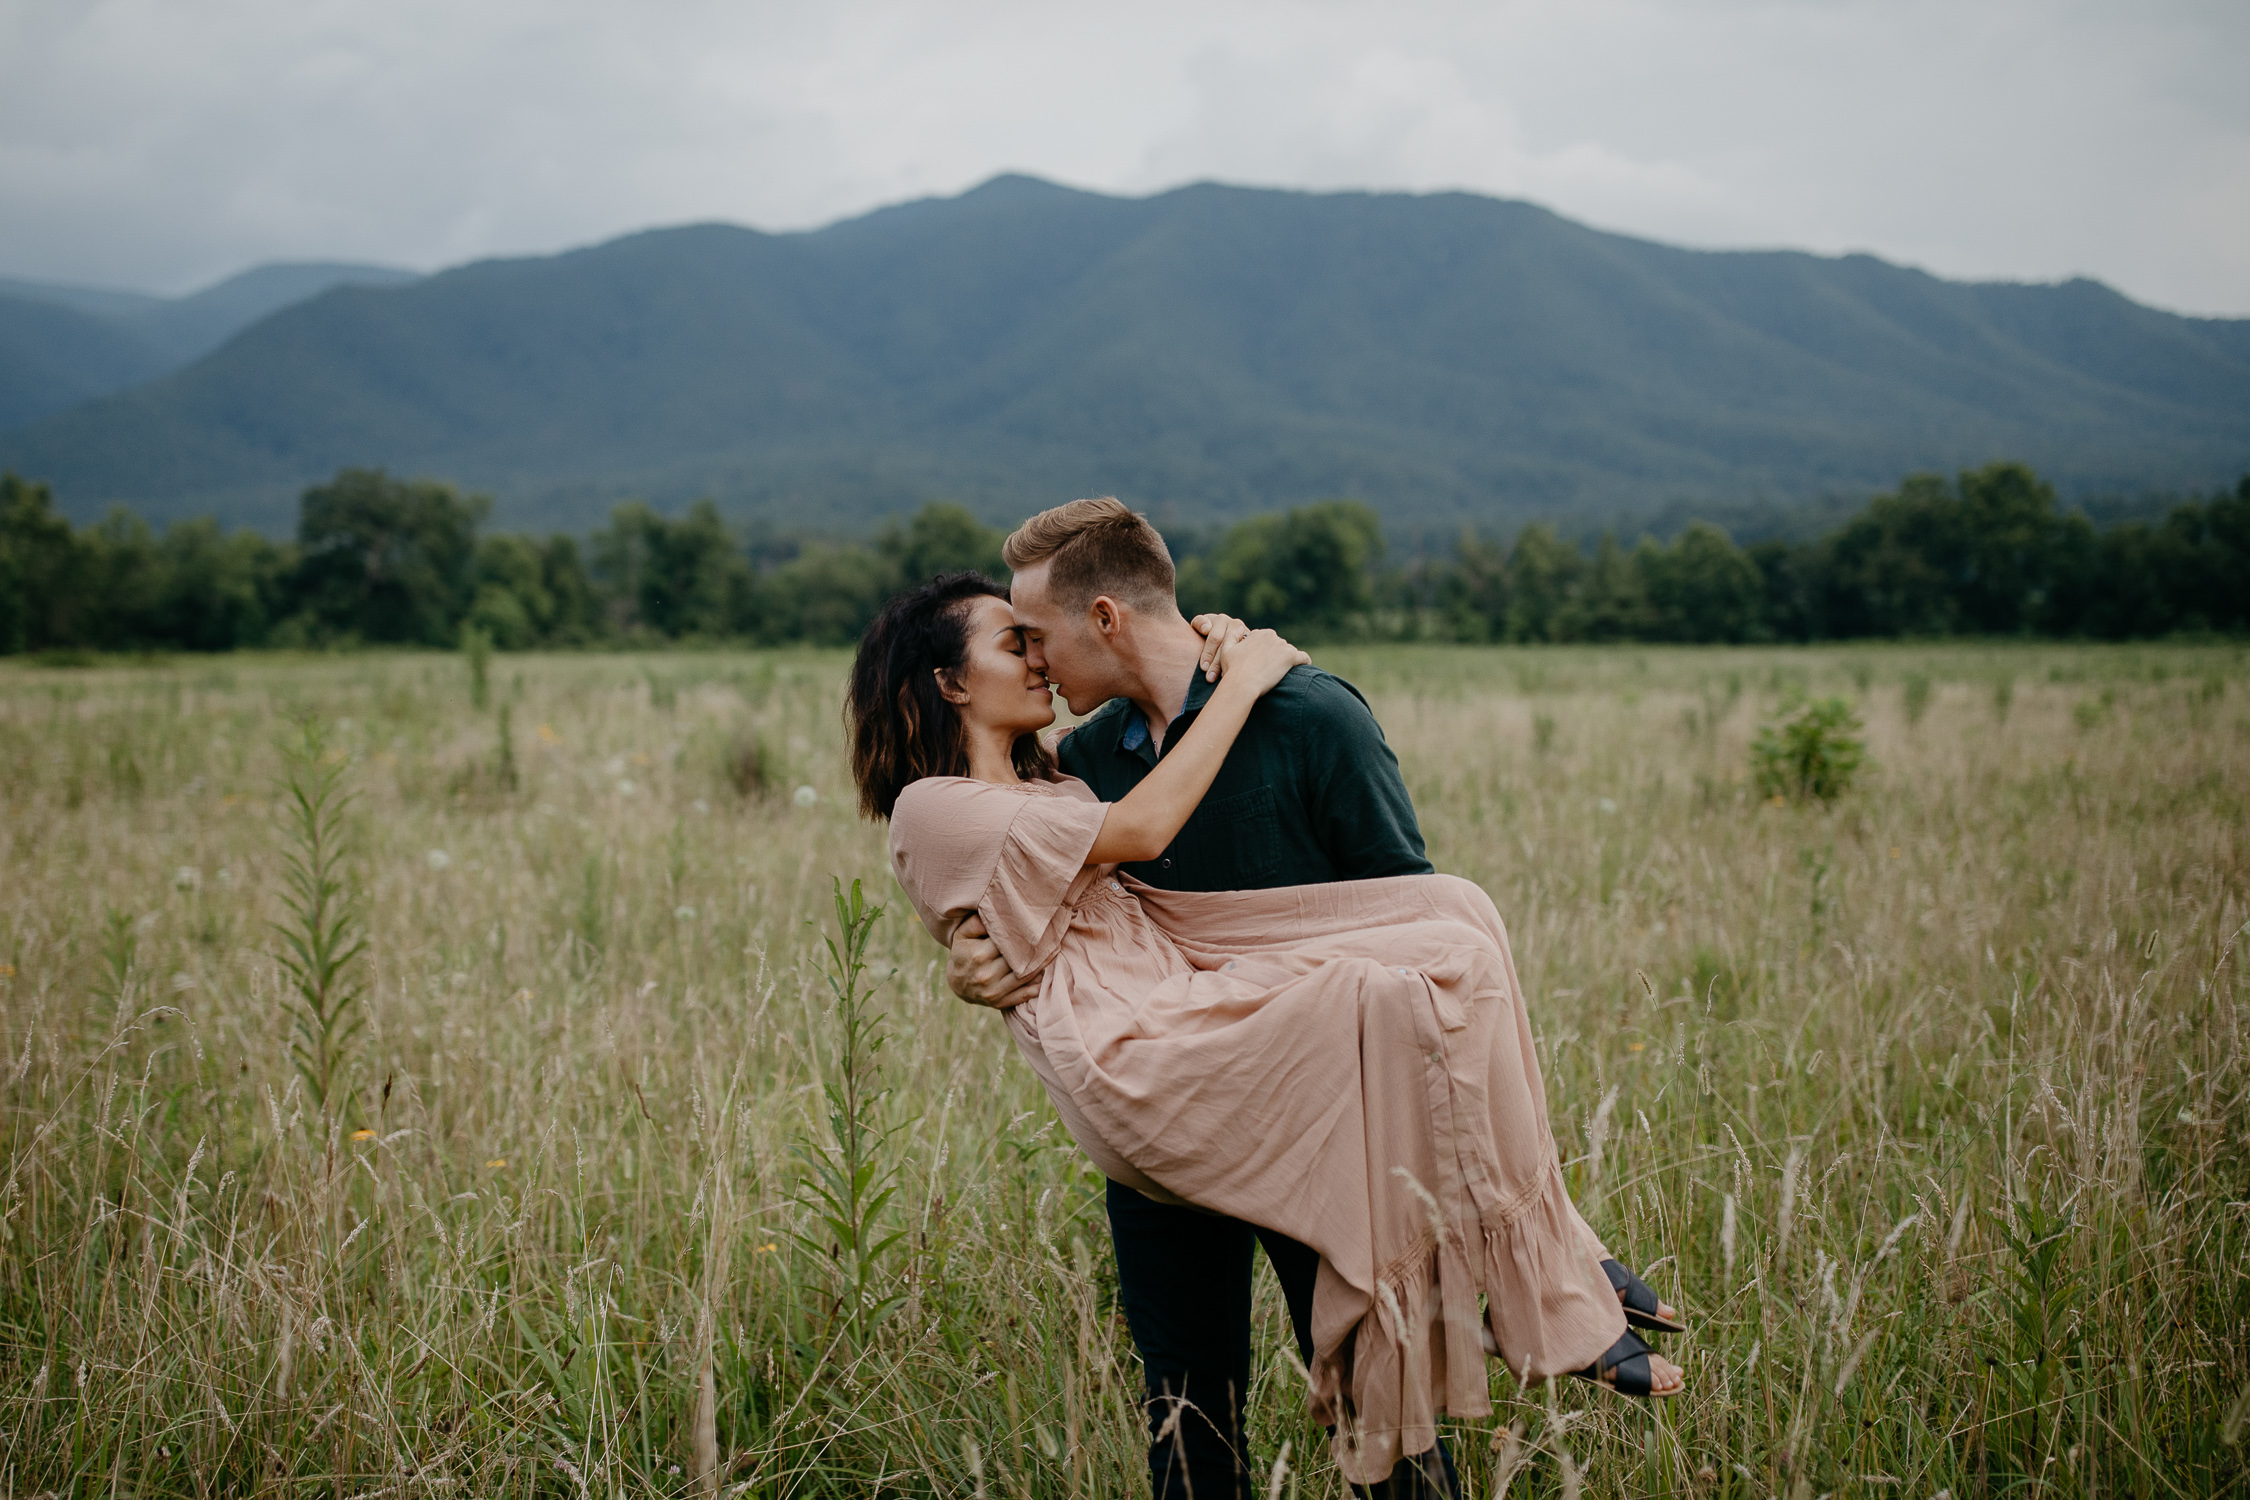 ariannamtorres and isaac engagement session at cades cove smoky mountains elopement-29.jpg